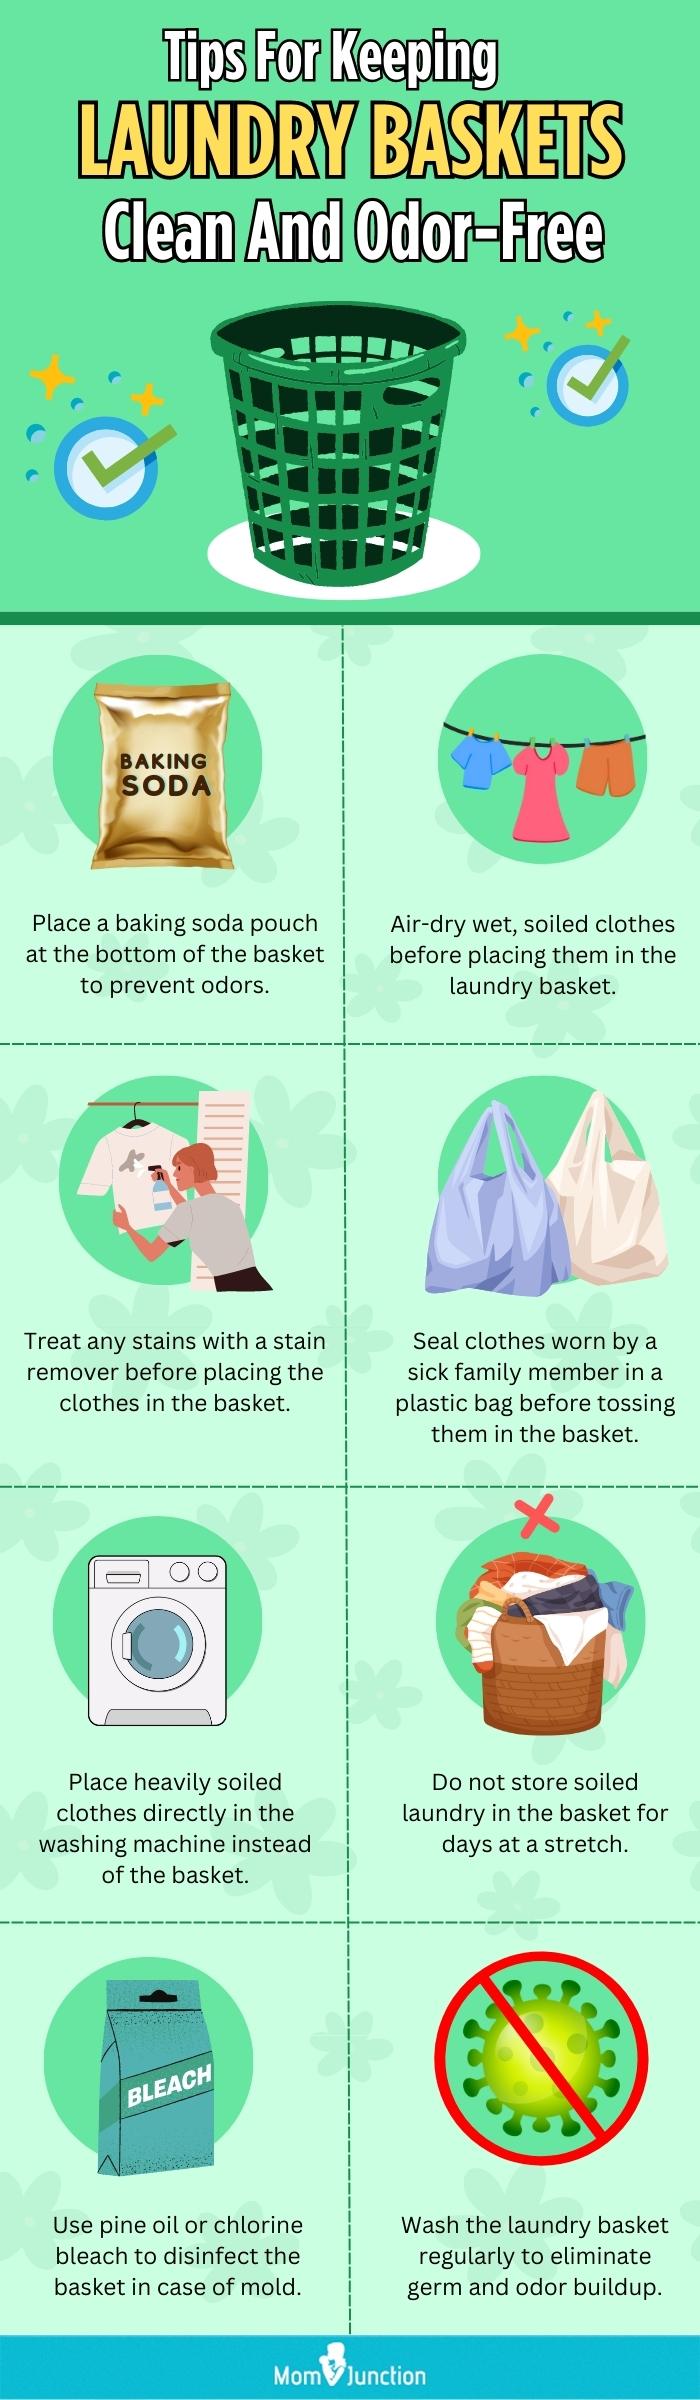 Tips For Keeping Laundry Baskets Clean And Odor-Free (infographic)